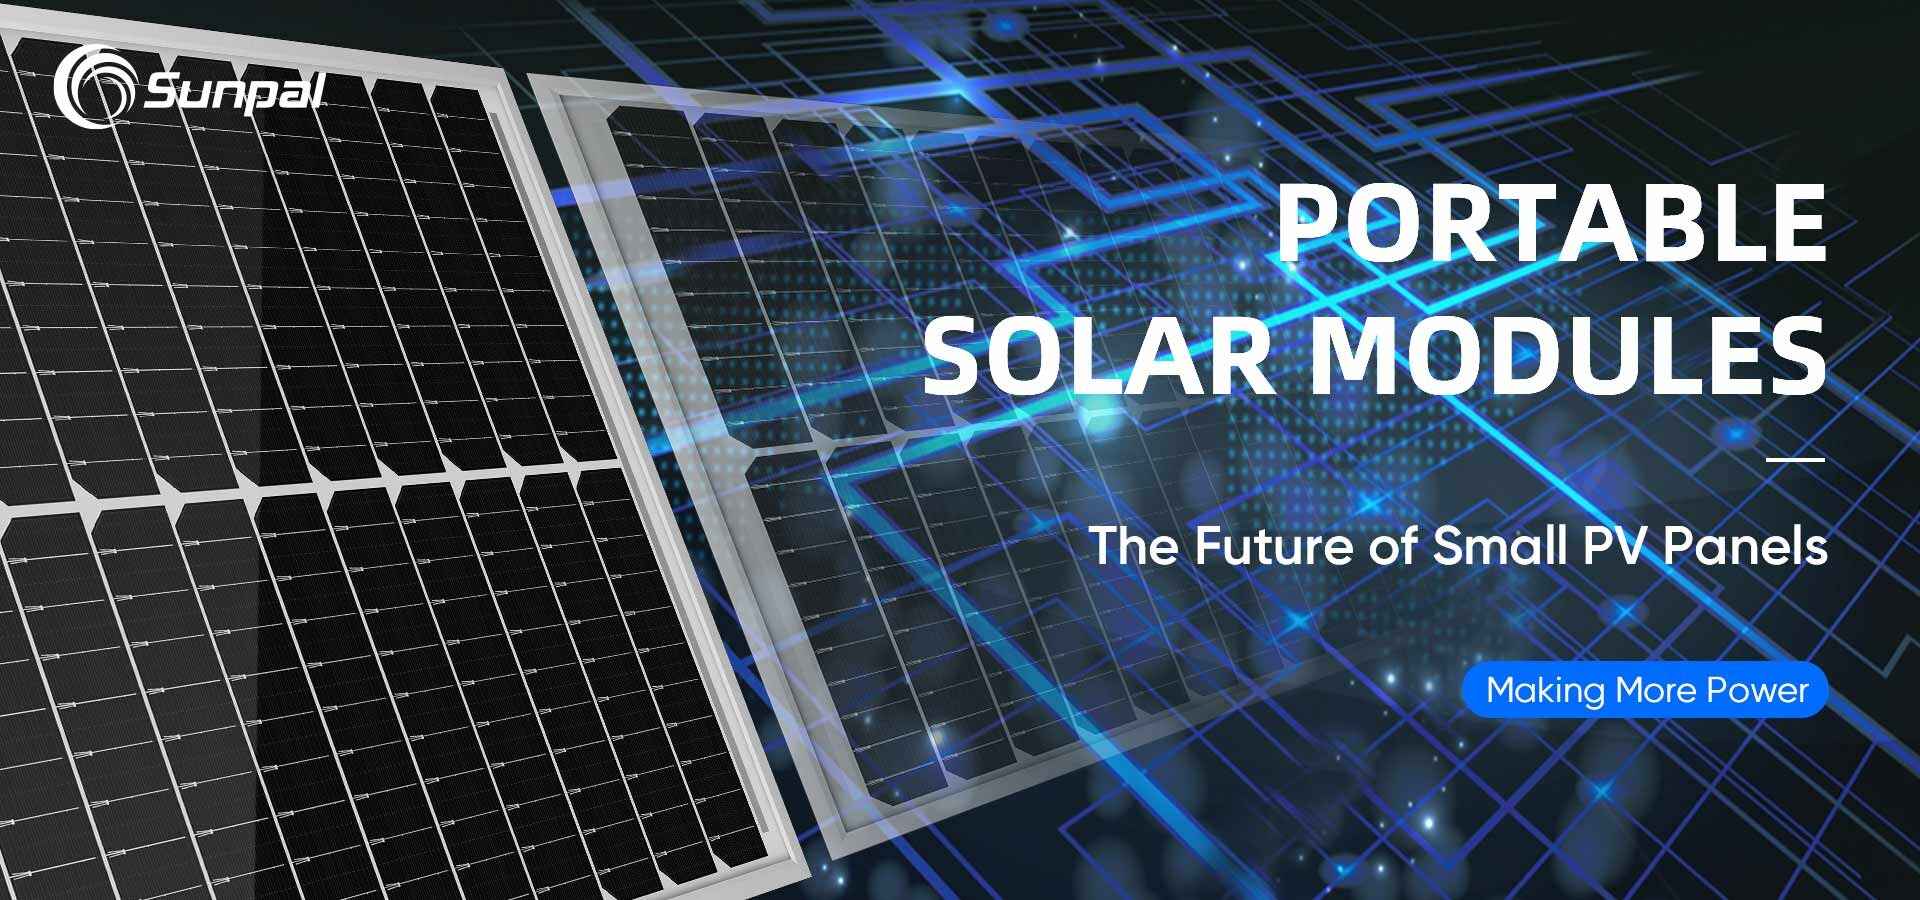 Powering Up Small: Solar's Future with Compact Panels